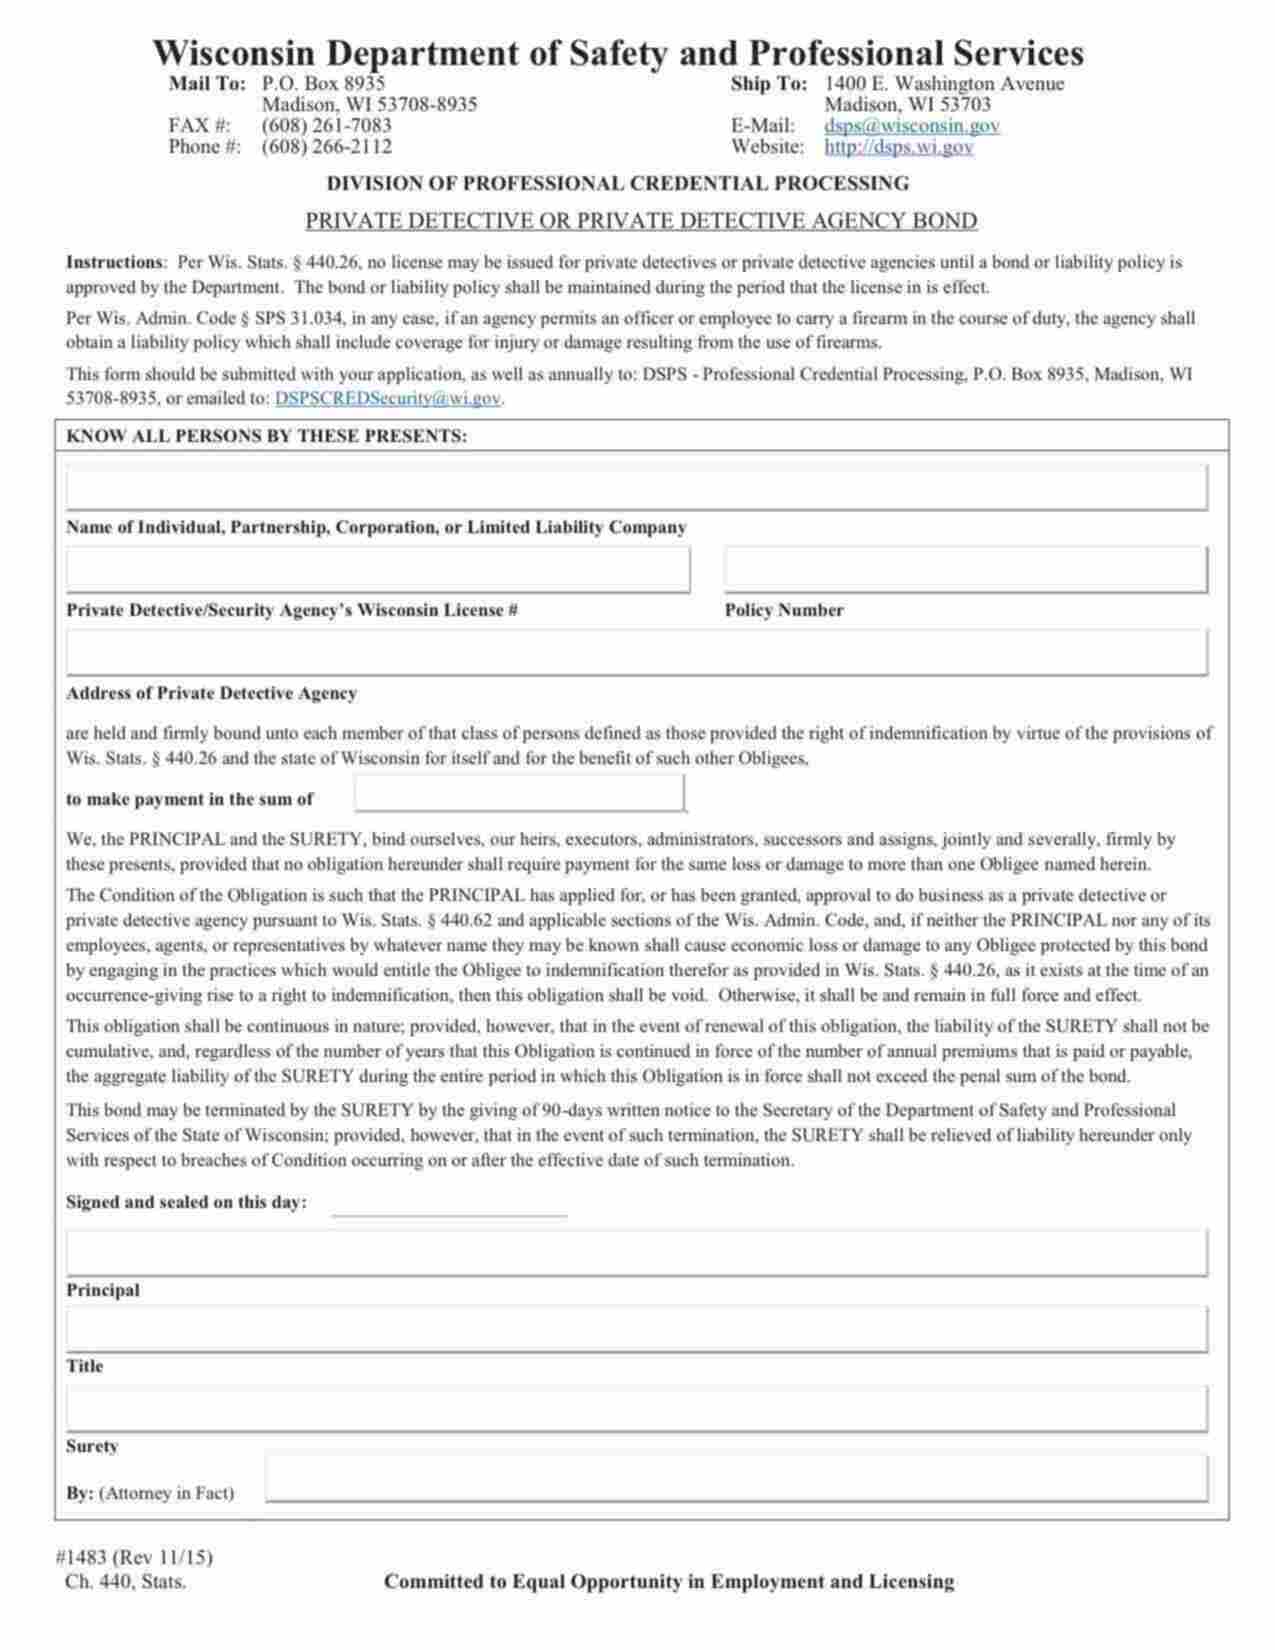 Wisconsin Private Detective or Private Detective Agency Bond Form